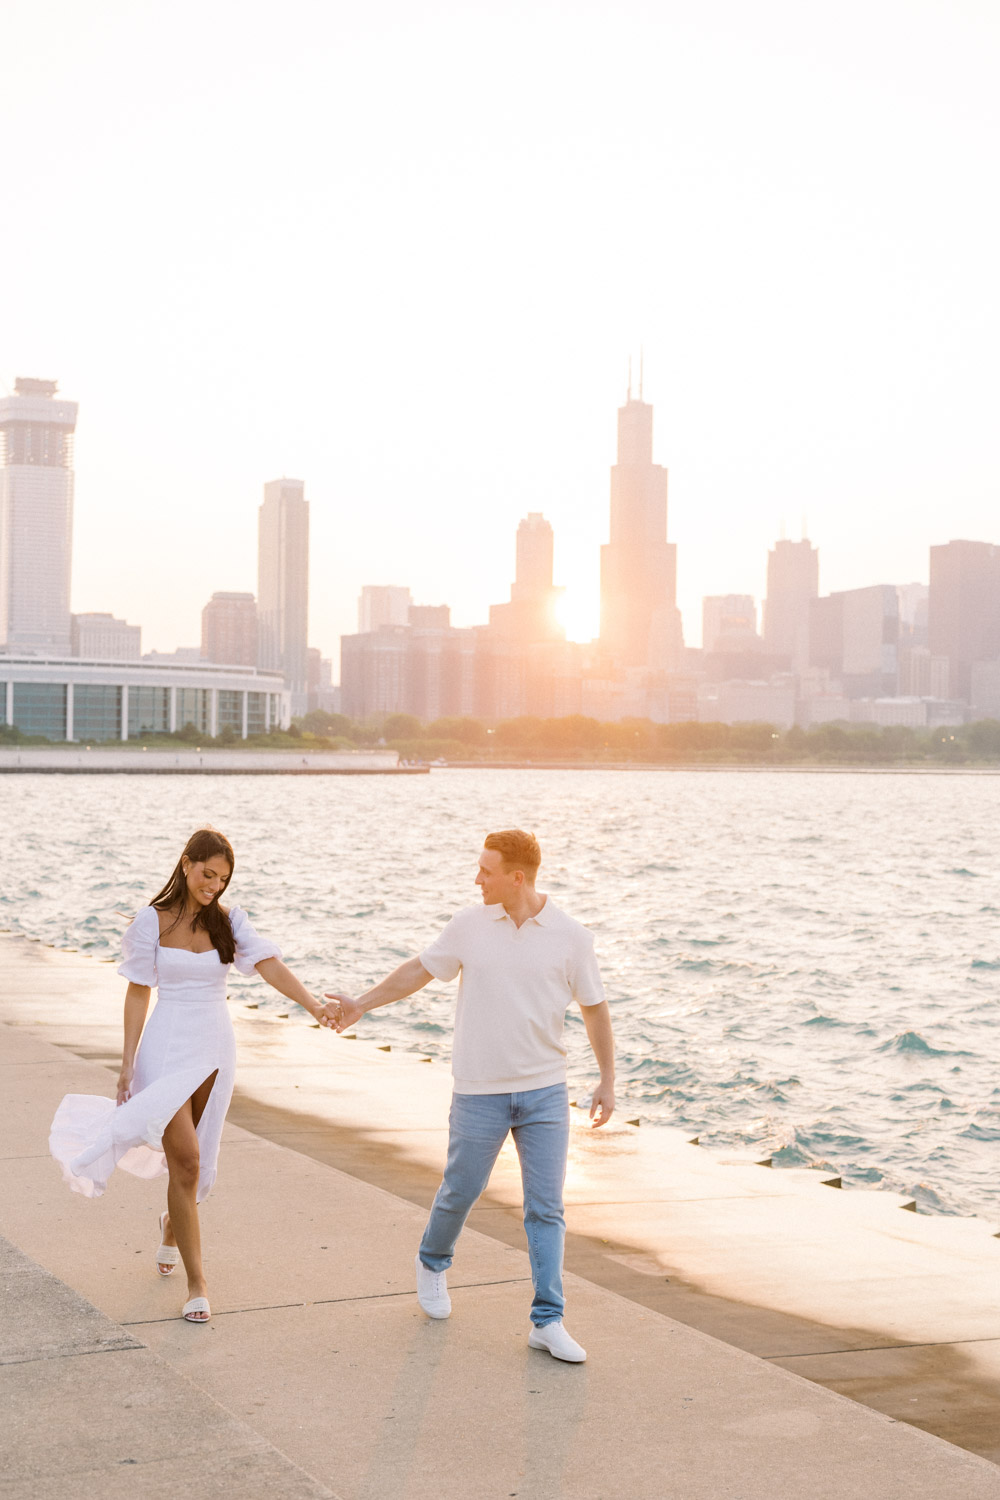 A sunset engagement photo taken at Chicago's Museum Campus